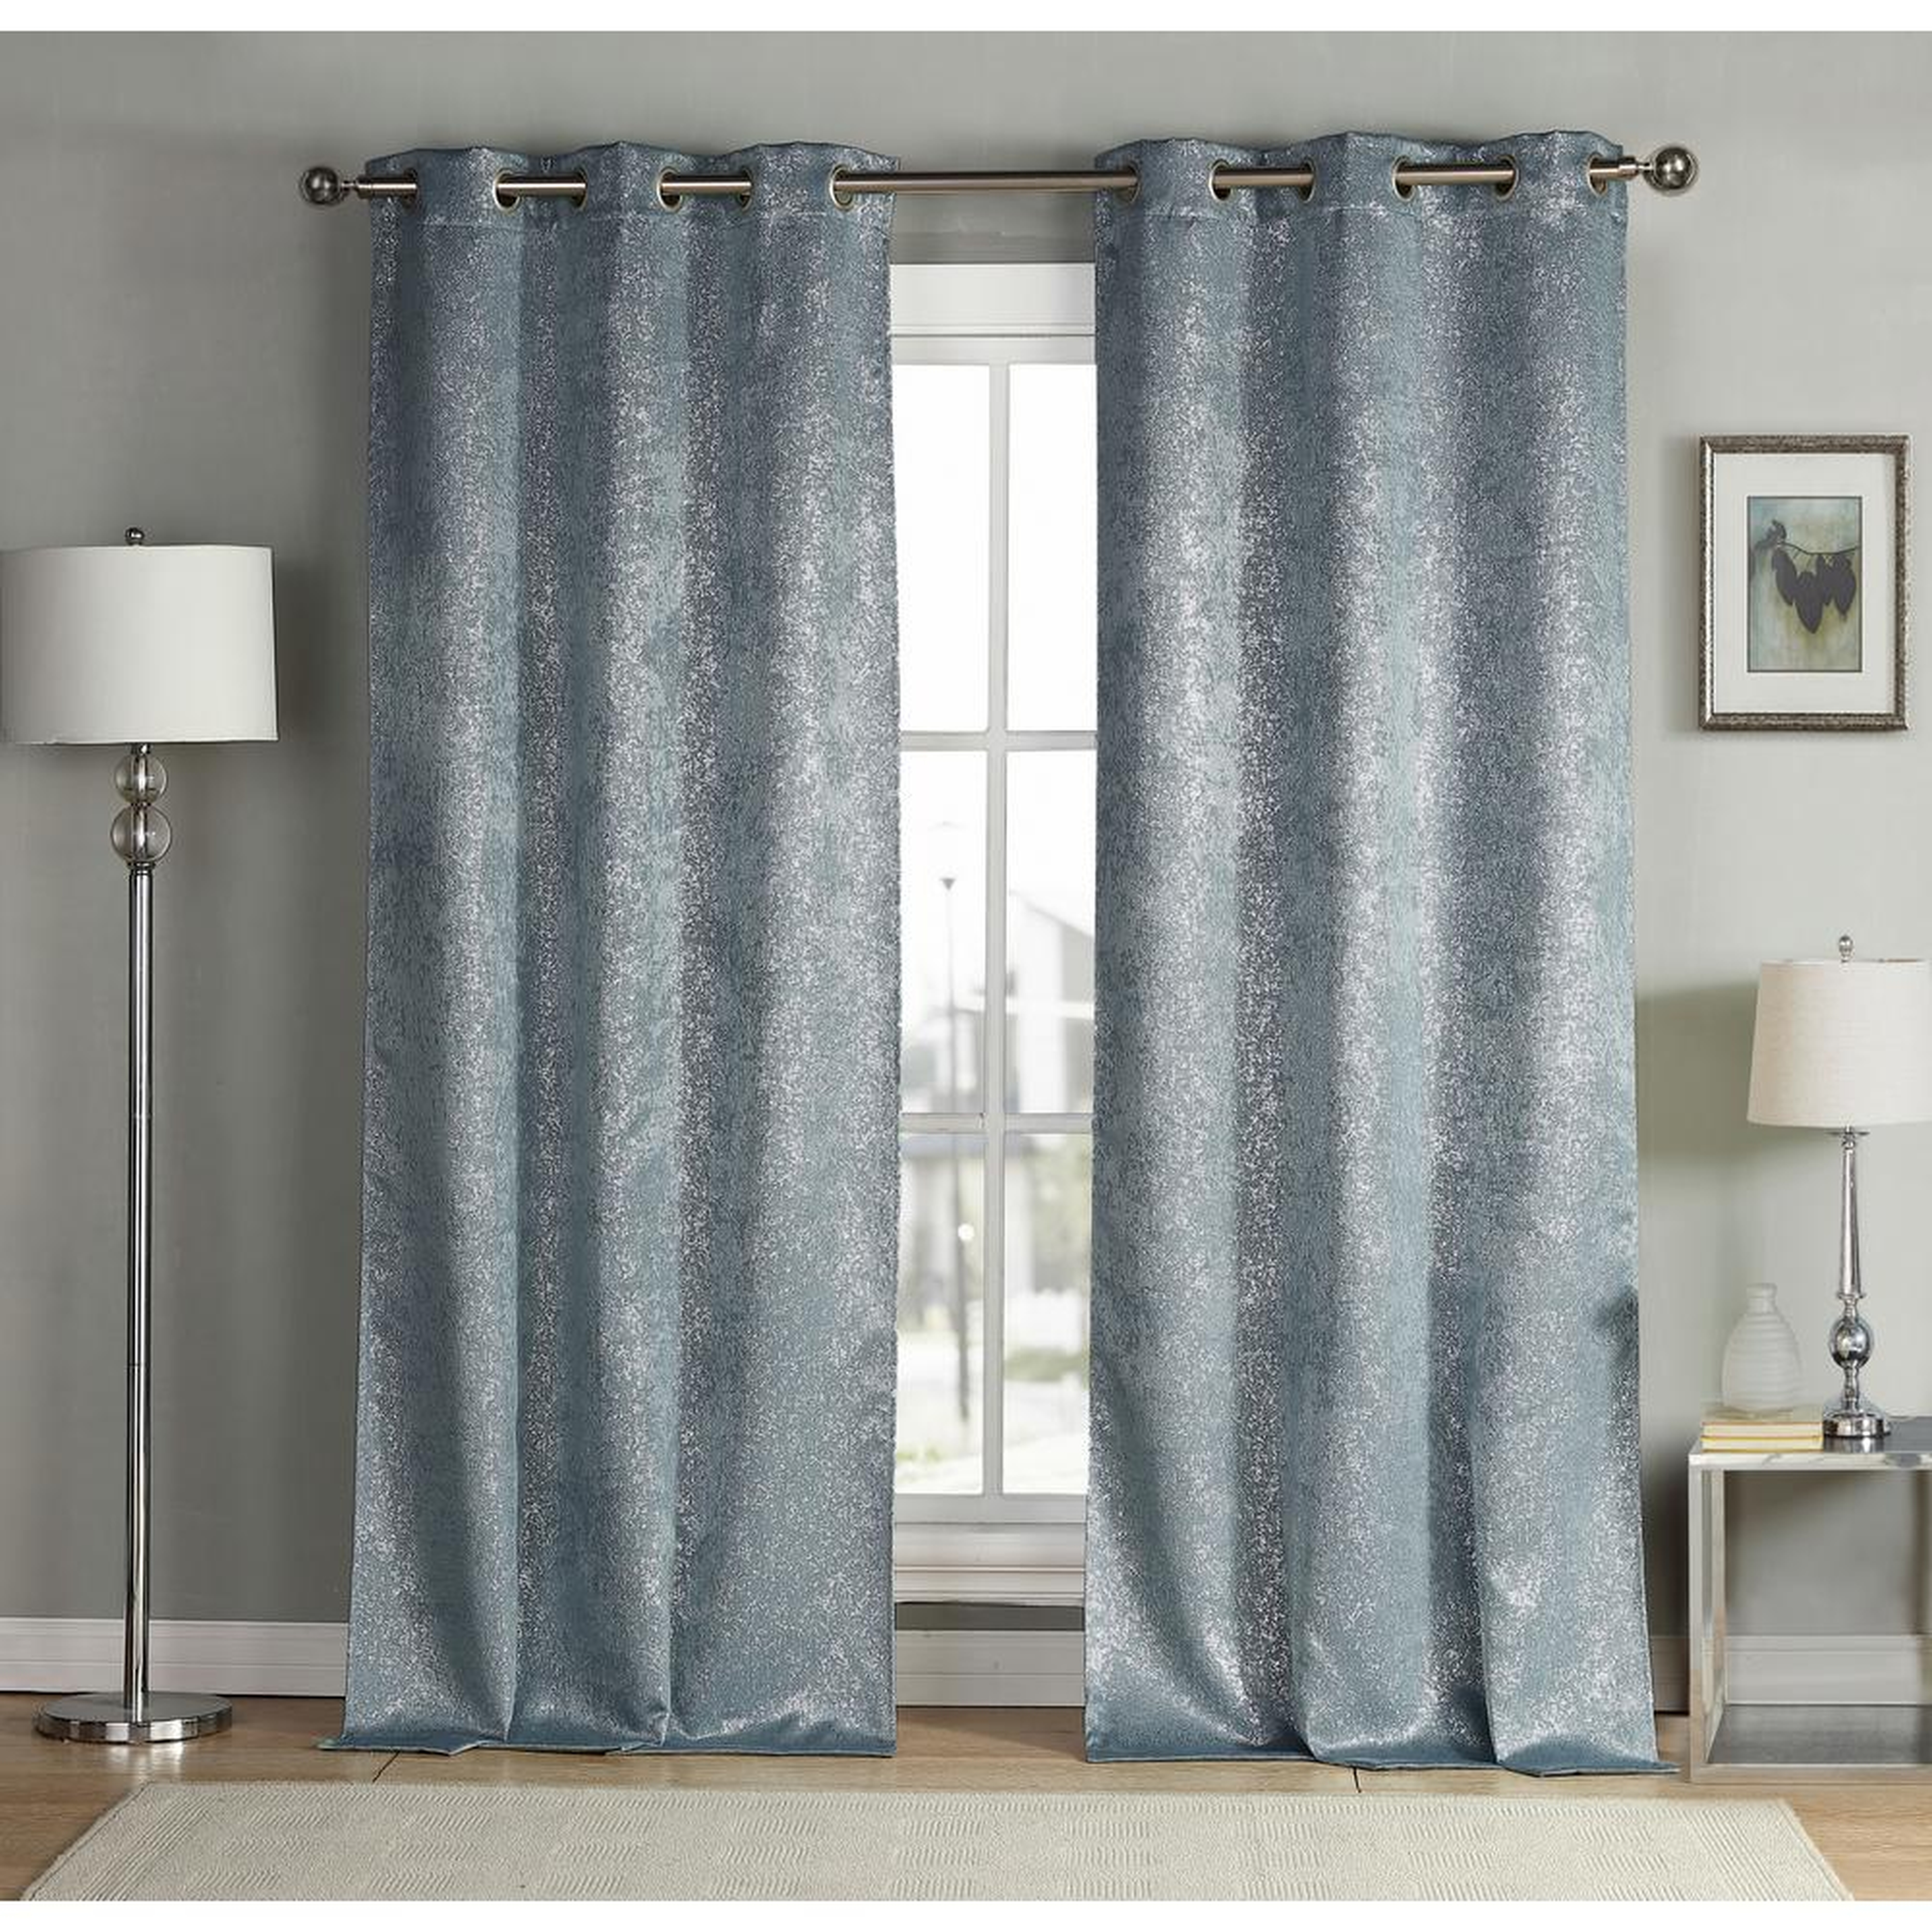 Duck River Maddie 84 in. L x 38 in. W Polyester Blackout Curtain Panel in Slate Blue (2-Pack) - Home Depot